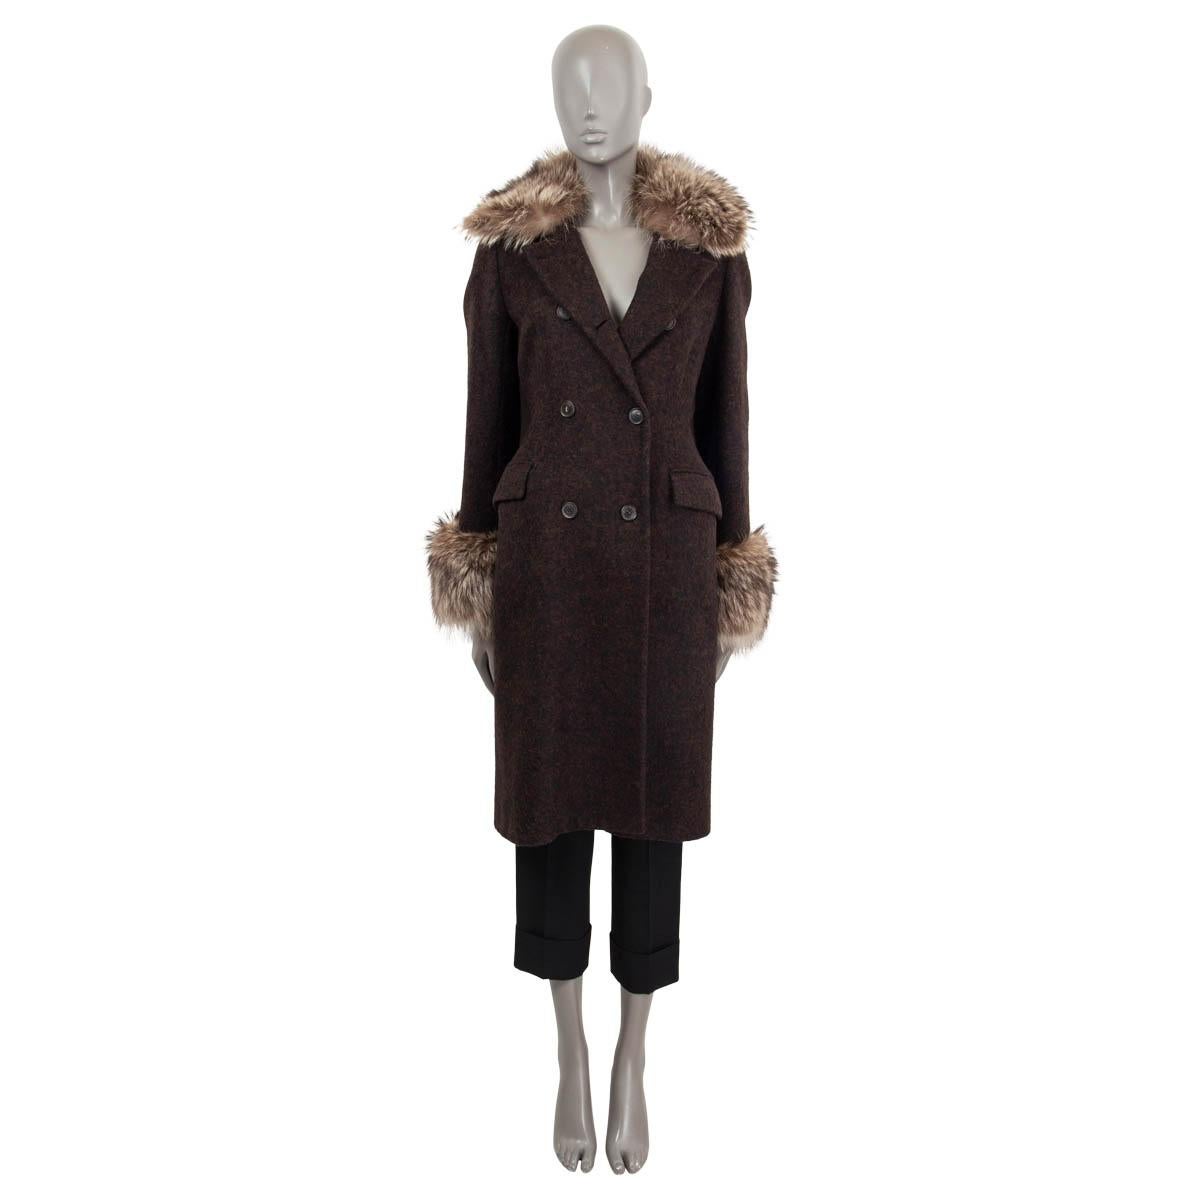 100% authentic Loro Piana double breasted coat in brown and black alpaca (95%) and nylon (5%). Features two flap pockets on the front, a detachable raccoon fur collar and detachable cuffs. Lined in cupro (100%). Has been worn and is in excellent